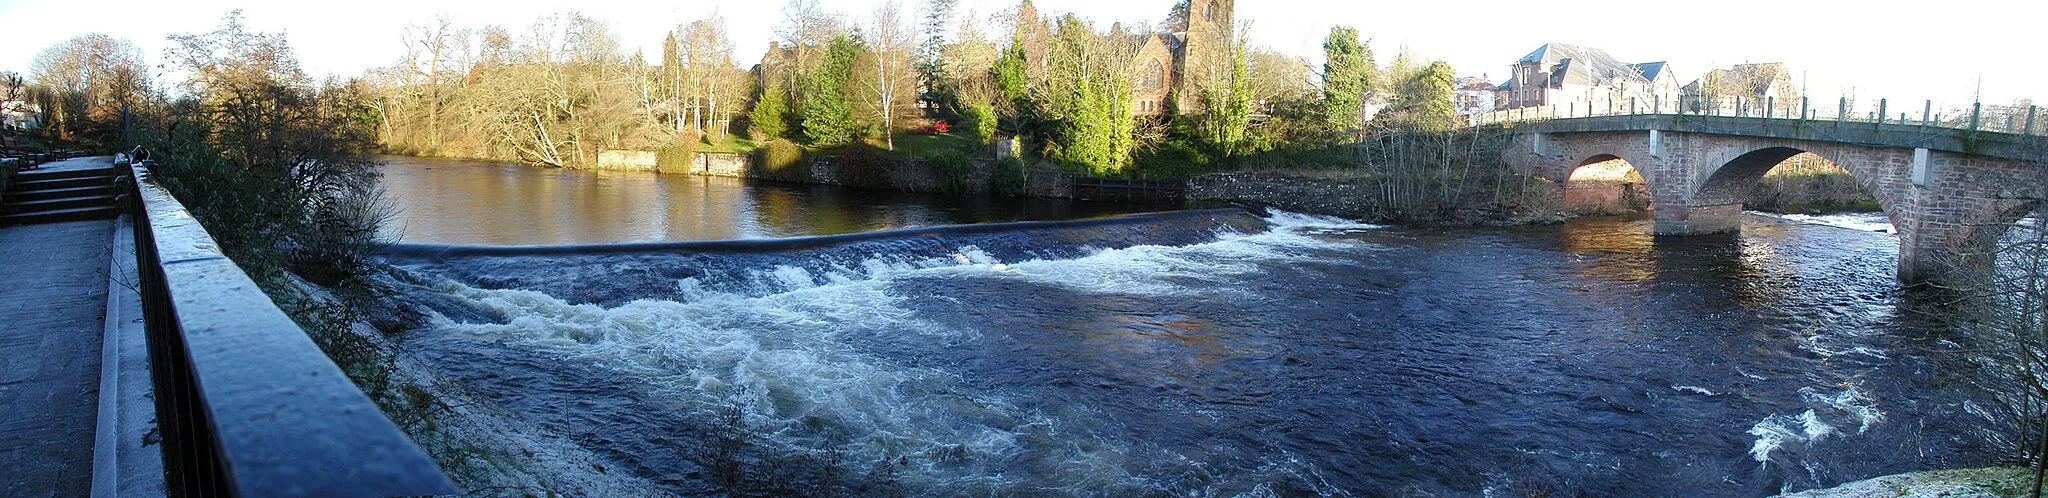 Photo showing: Bridge over the River Ericht, joining Blairgowrie and Rattray. Taken by Steven D. Reid 16 December 2006 http://www.tomatedesign.com